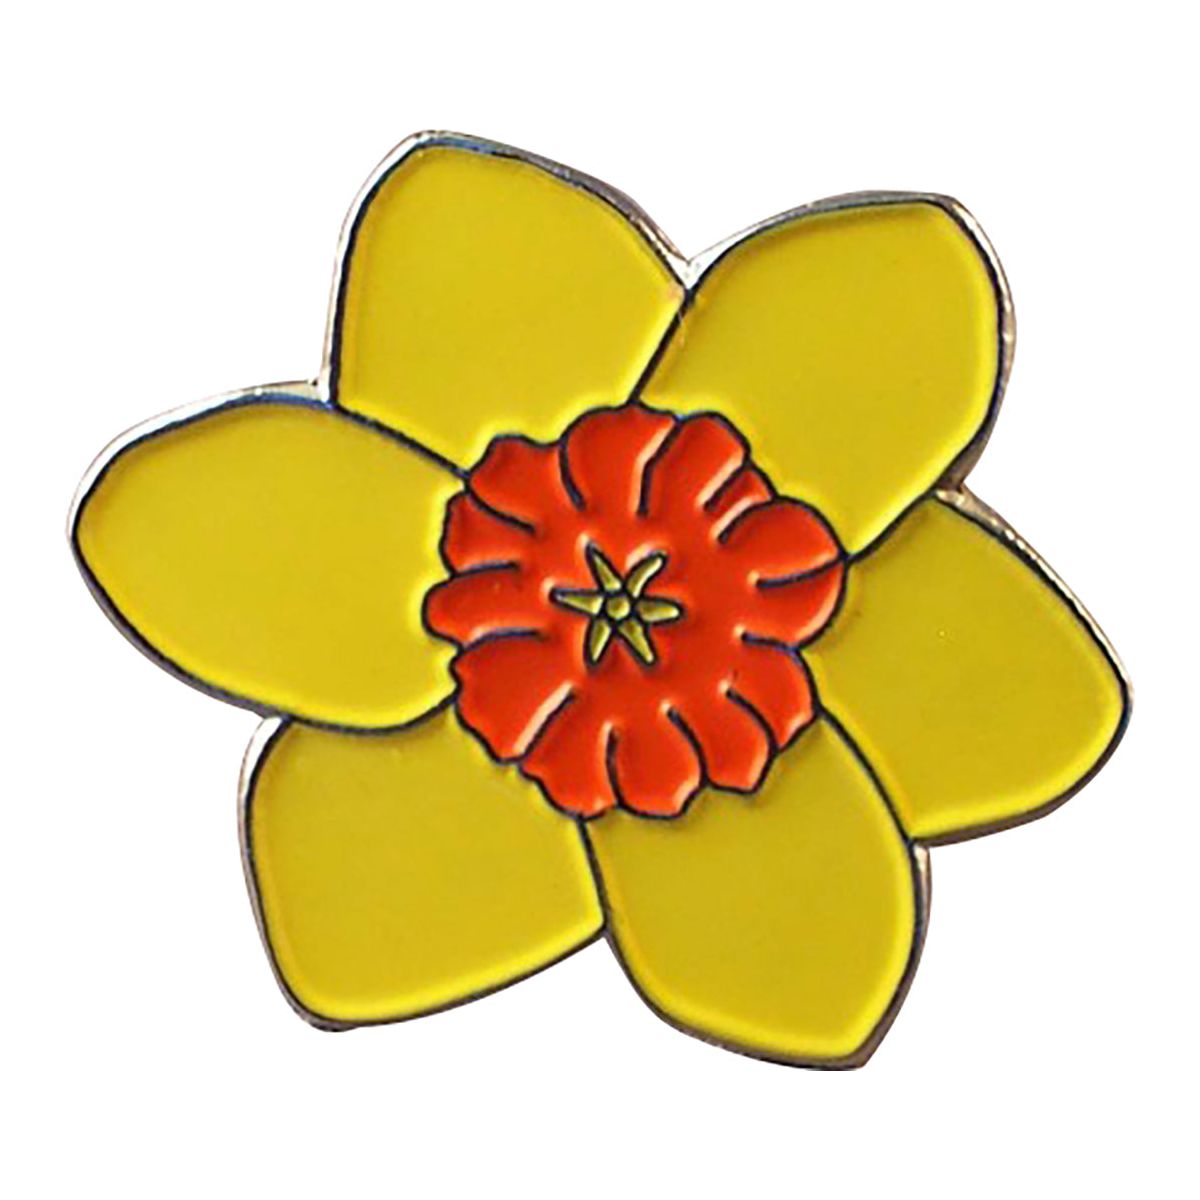 Yellow Welsh Daffodil Flower Lapel Pin Badge - Ashton and Finch